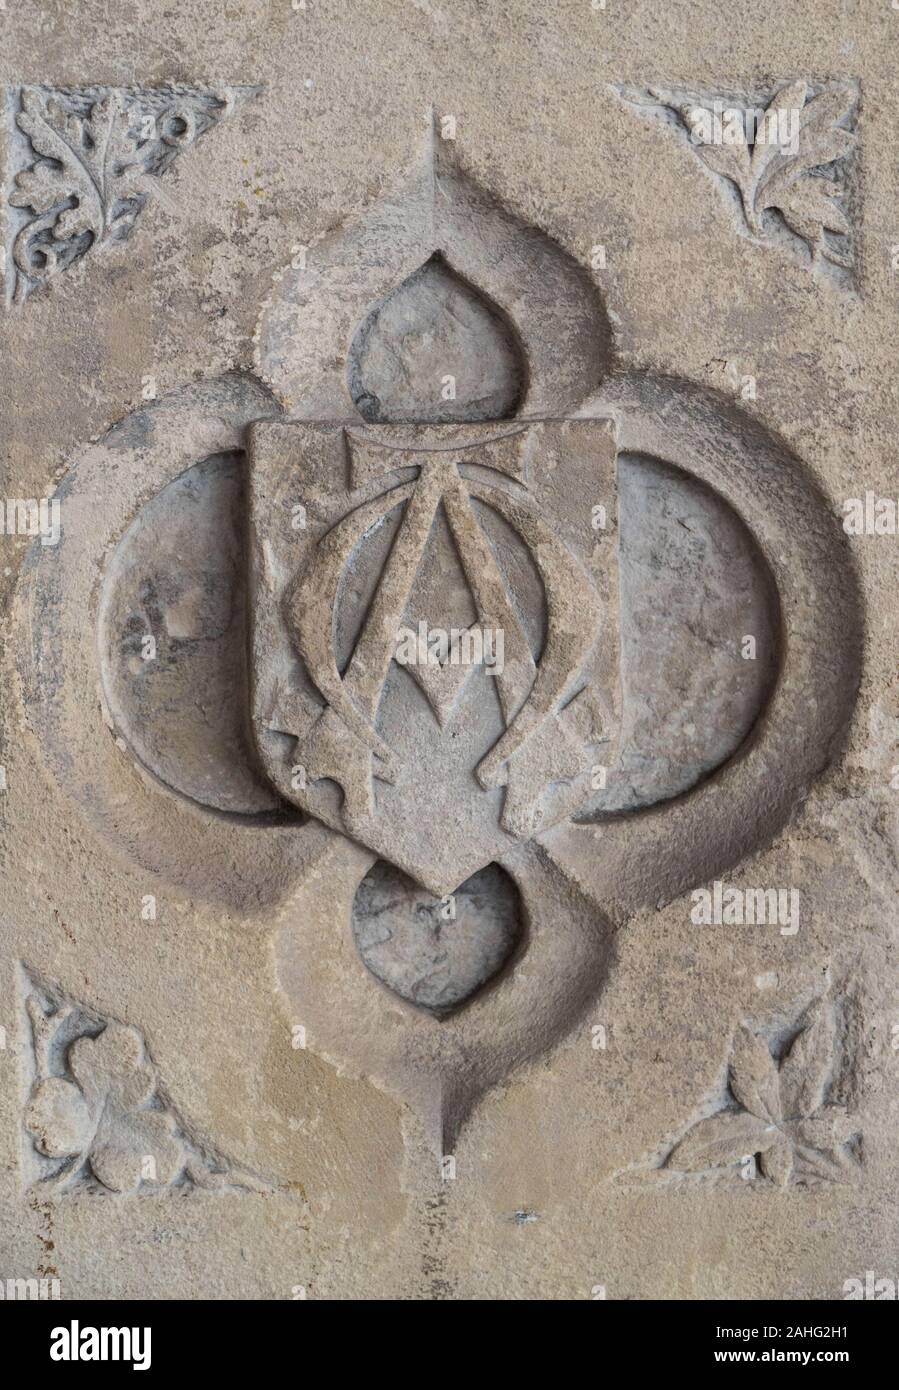 Ornate font carving of the monogram Alpha and Omega, St Catherine church Hoarwithy Herefordshire UK. February 2019 Stock Photo